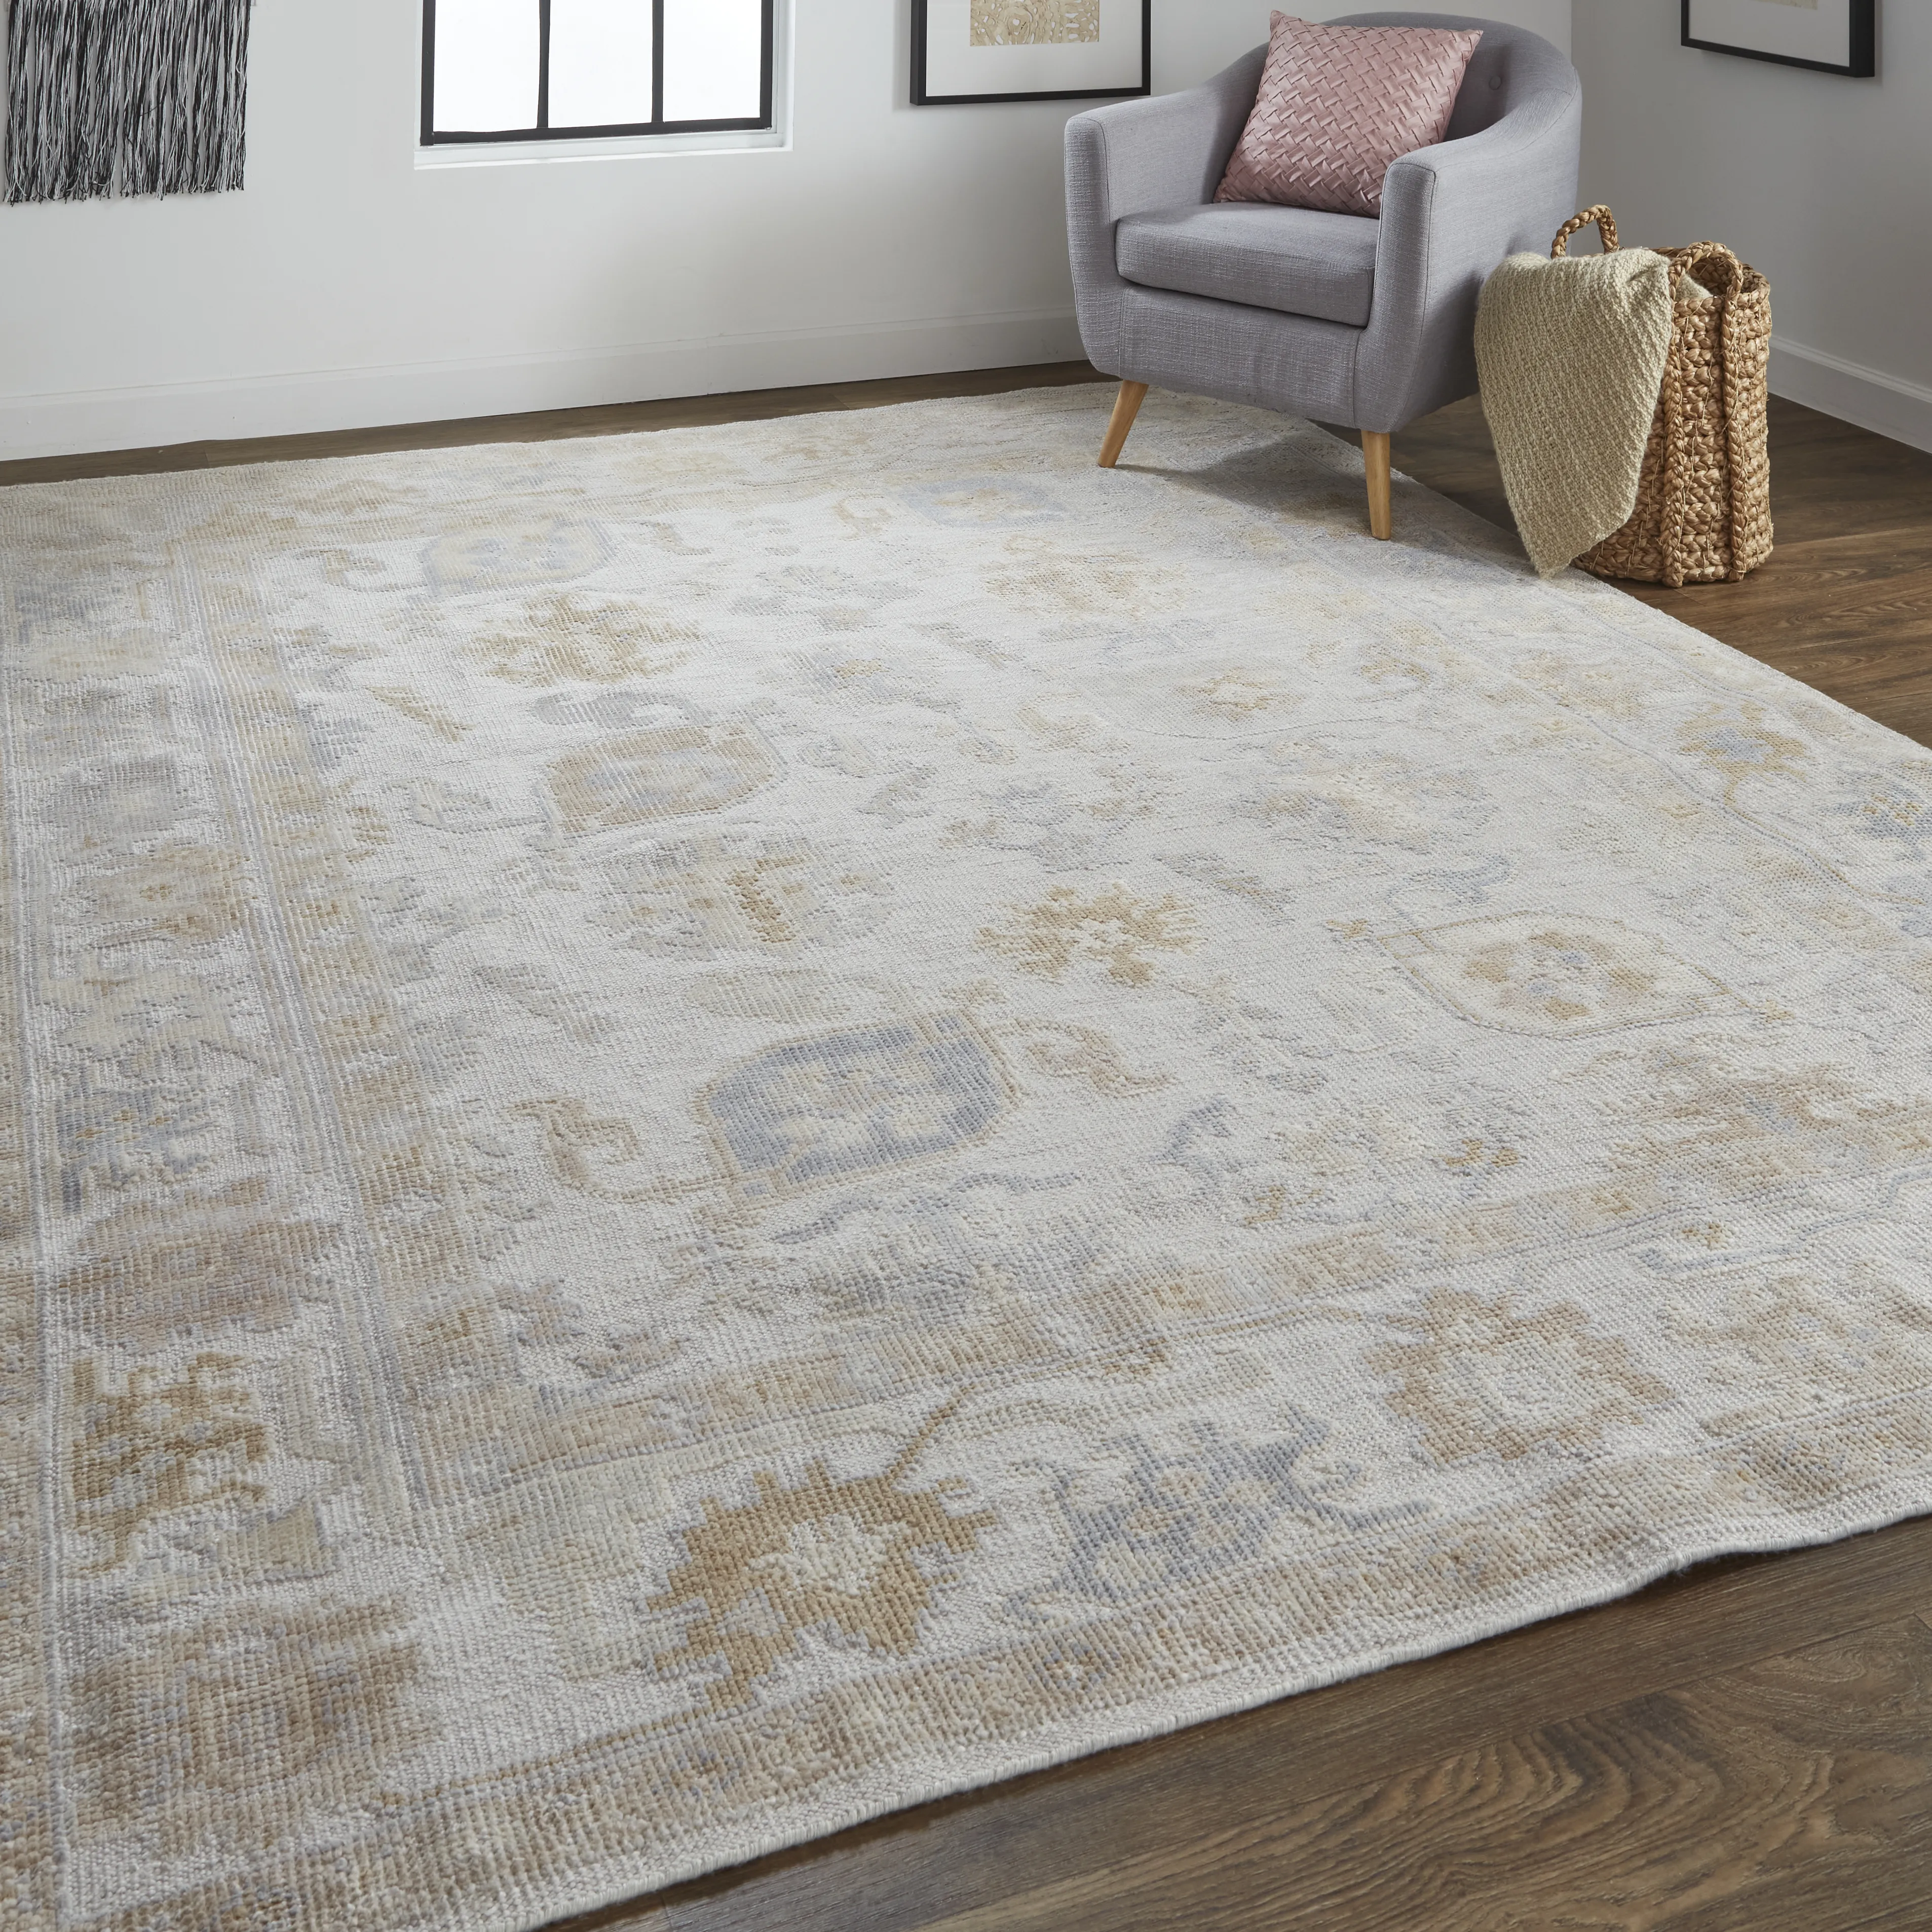 Wendover 6847F Ivory/Tan 8' x 10' Rug